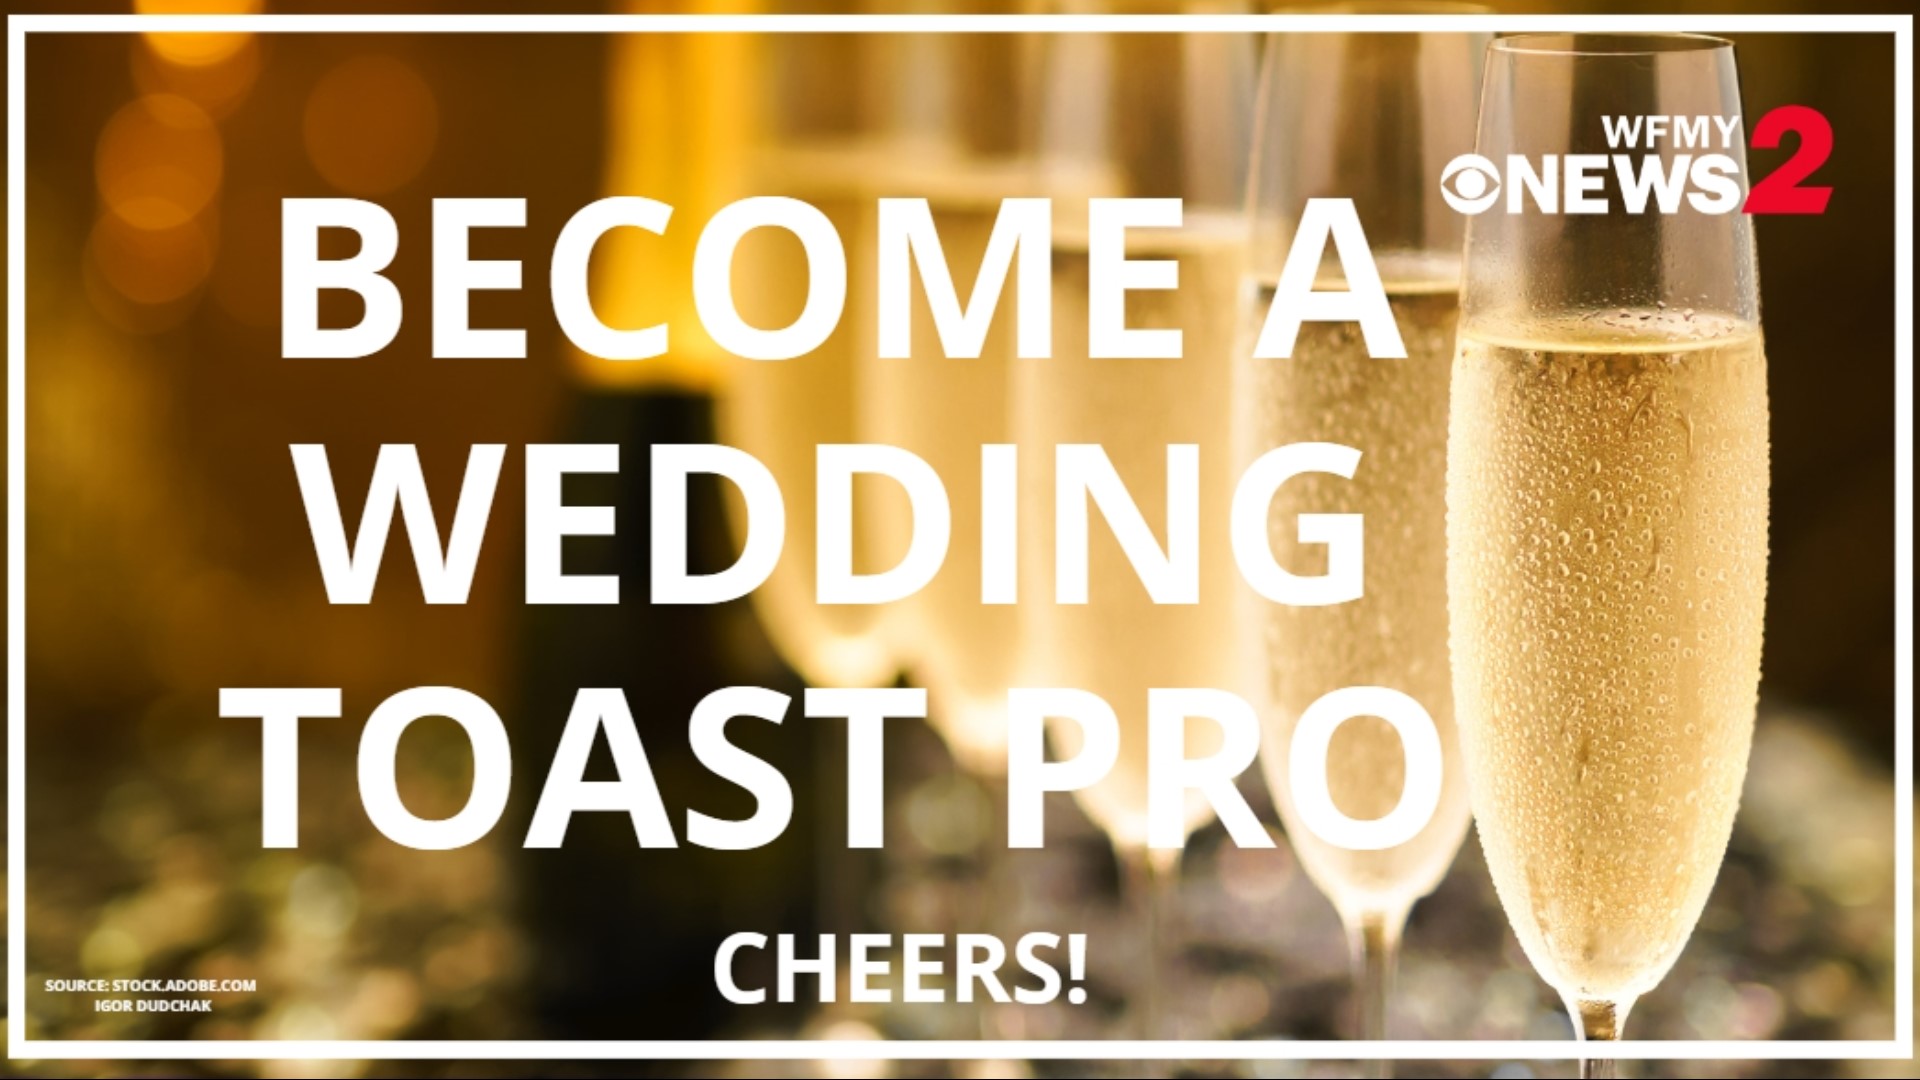 Speaking in front of a crowd can be nerve-wracking. Add in emotions on a wedding day, sometimes the toast doesn't go as planned.